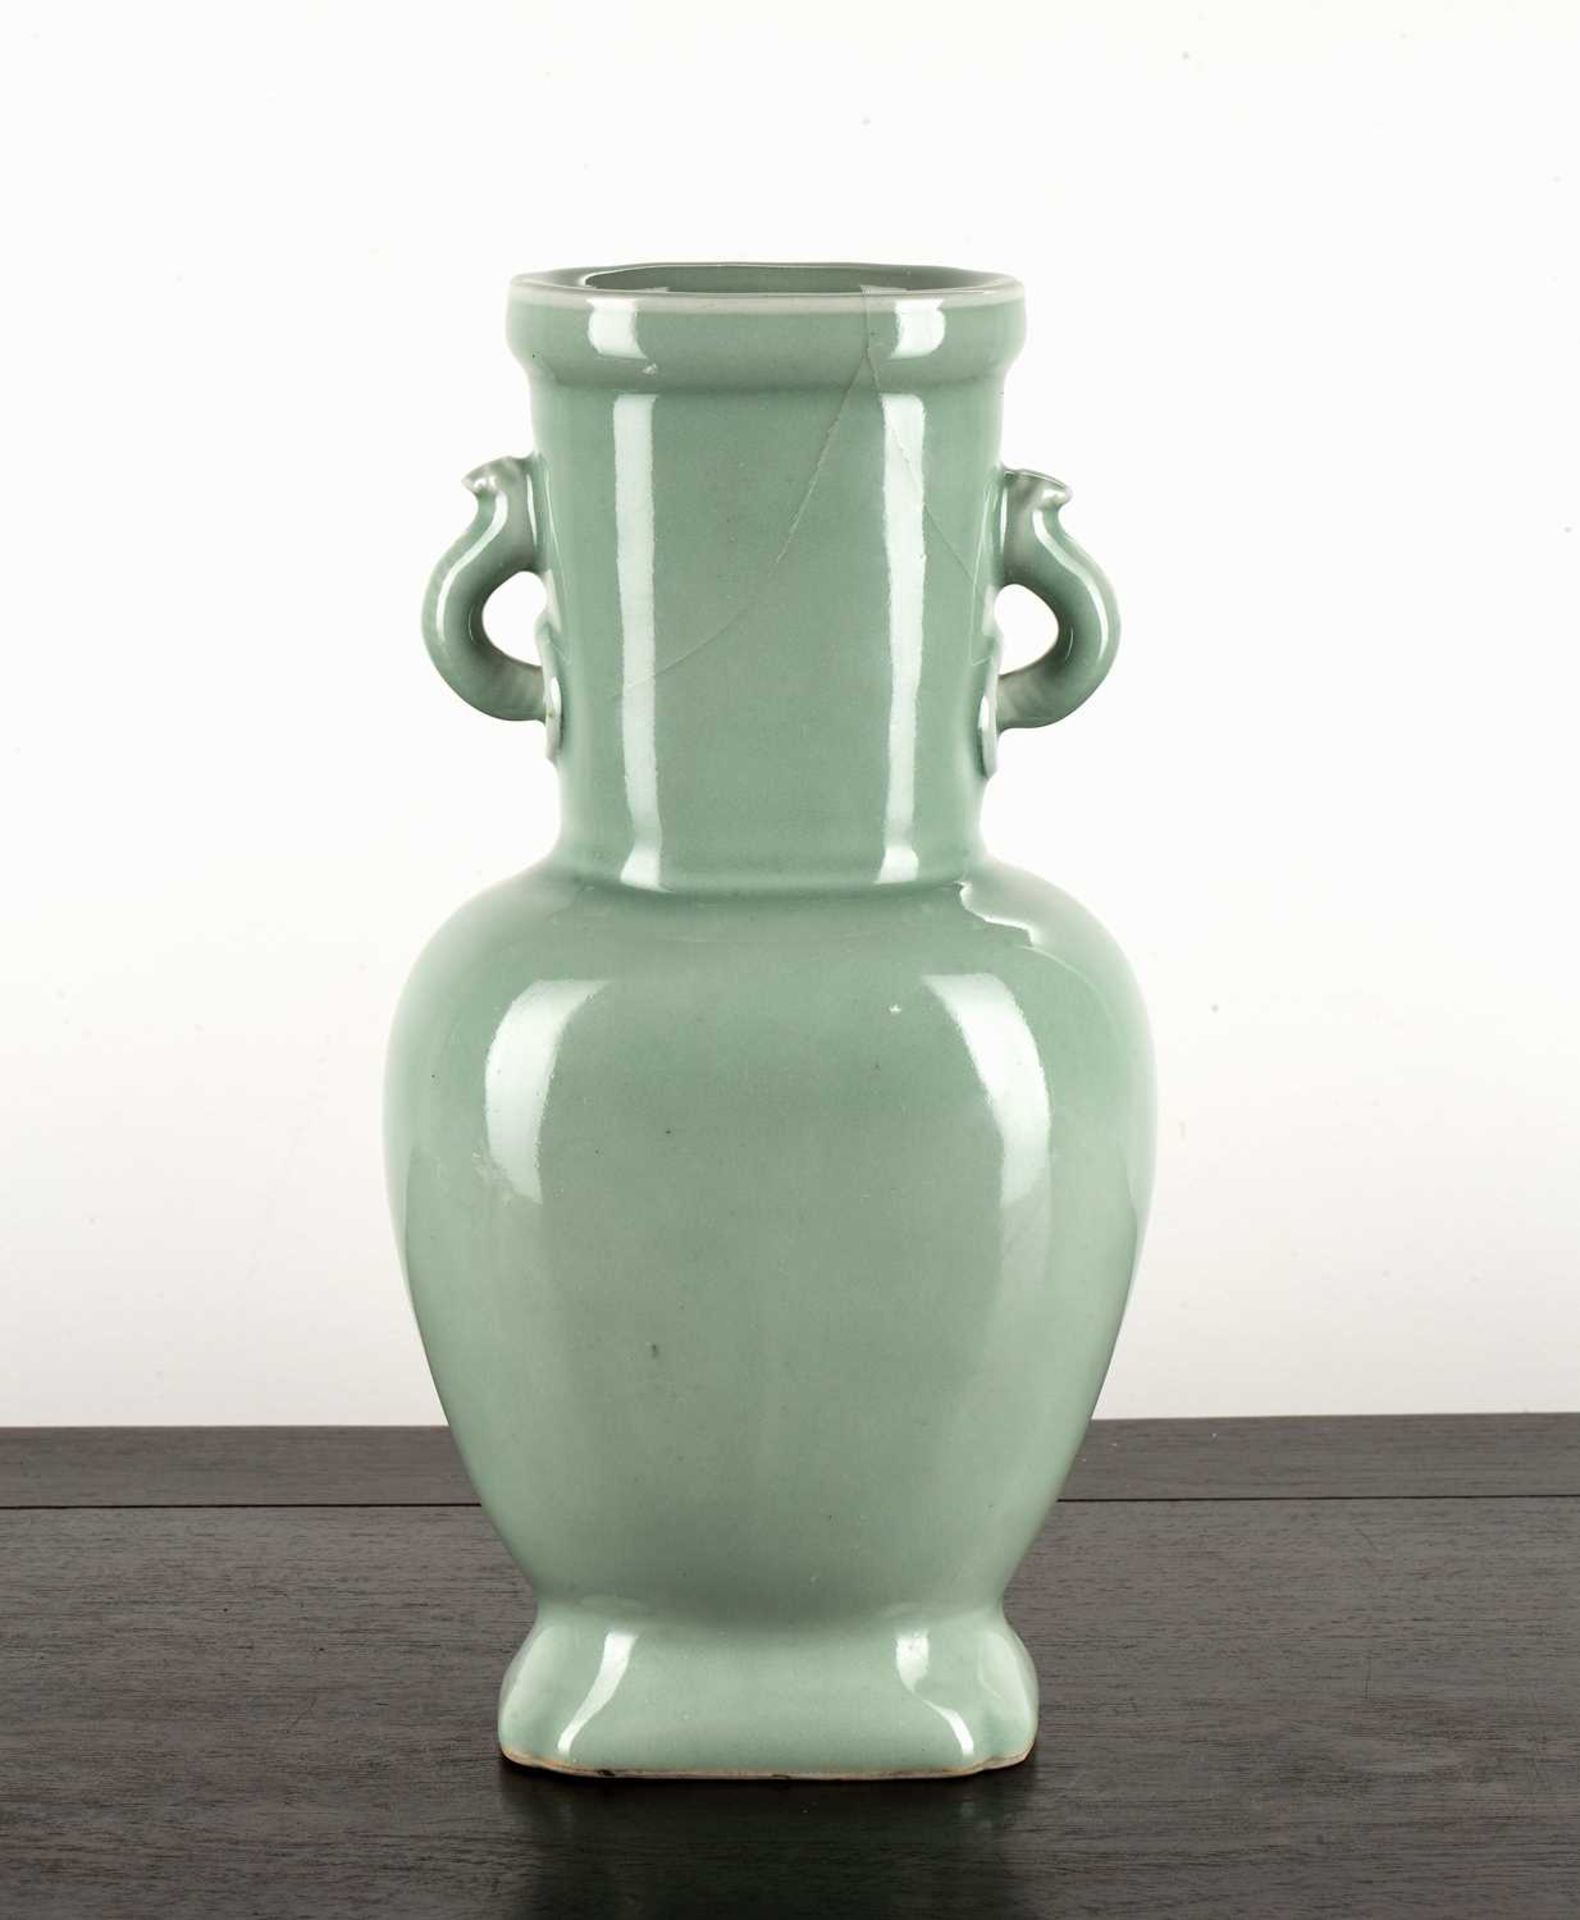 Celadon vase Chinese decorated all over with a pale green glaze, with two loop handles and